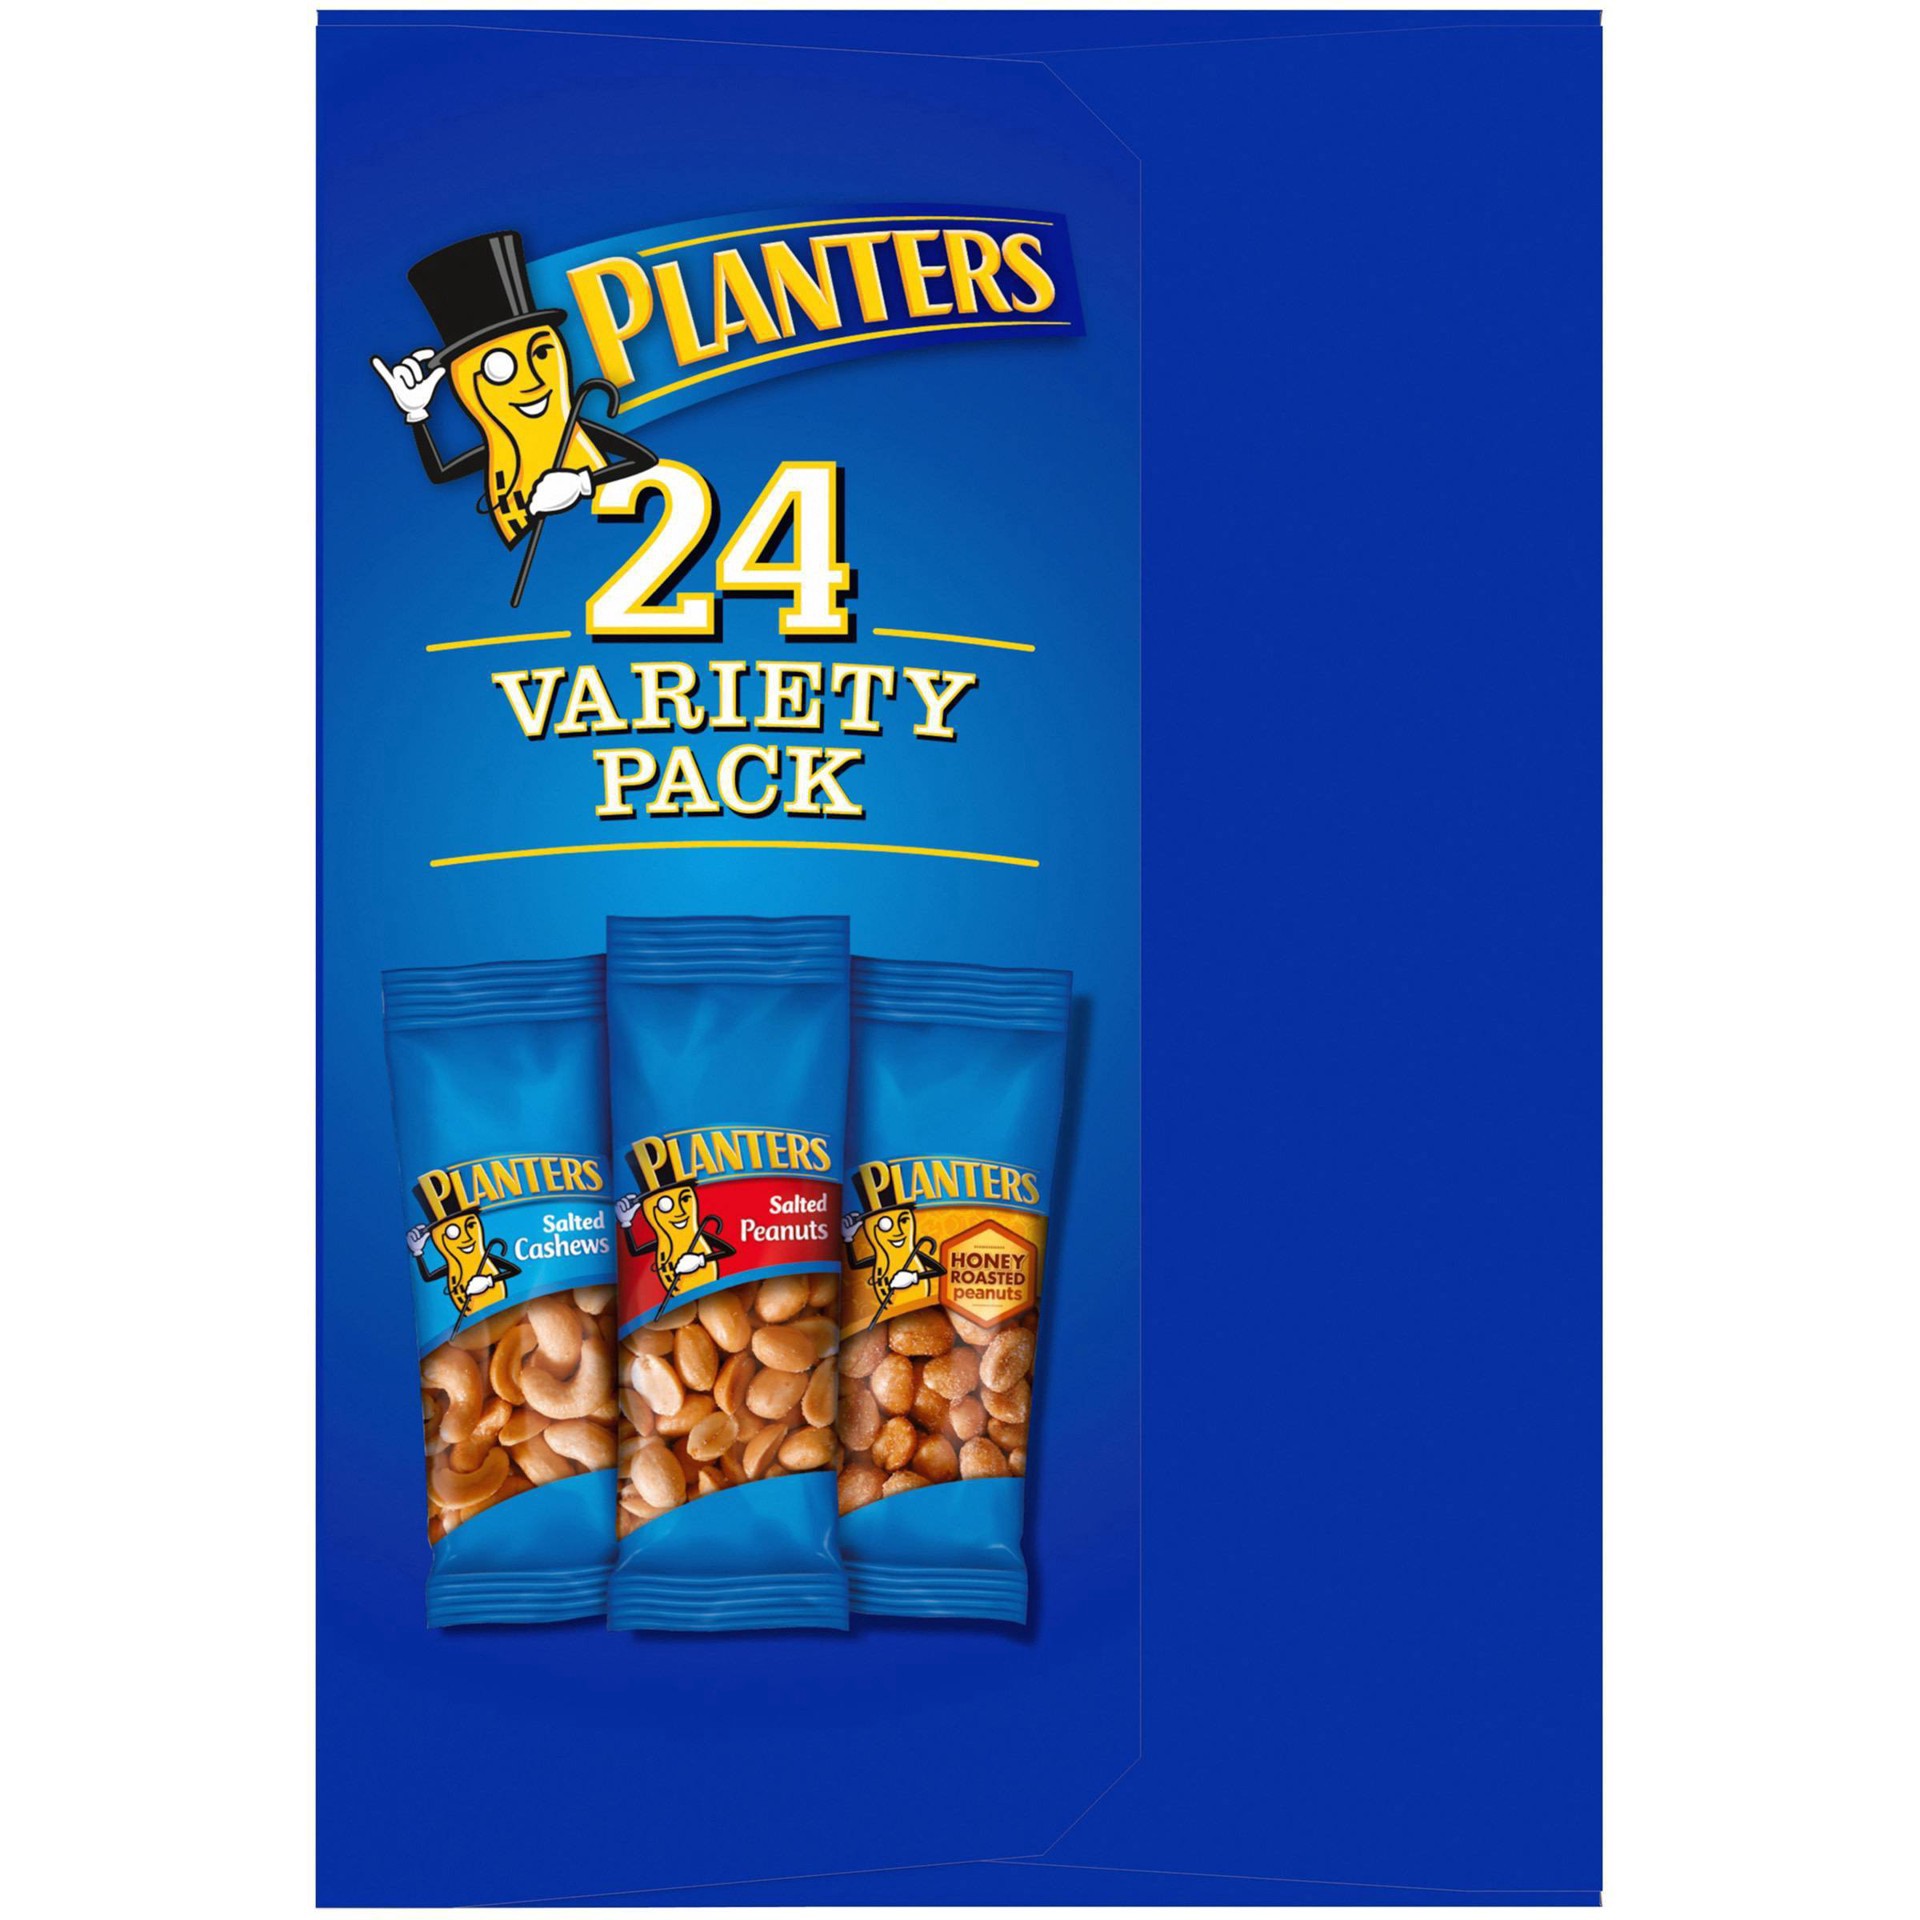 slide 15 of 27, Planters Nuts Cashews and Peanuts Variety Pack Snack Nuts, 24 ct - 40.5 oz Box, 40.5 oz